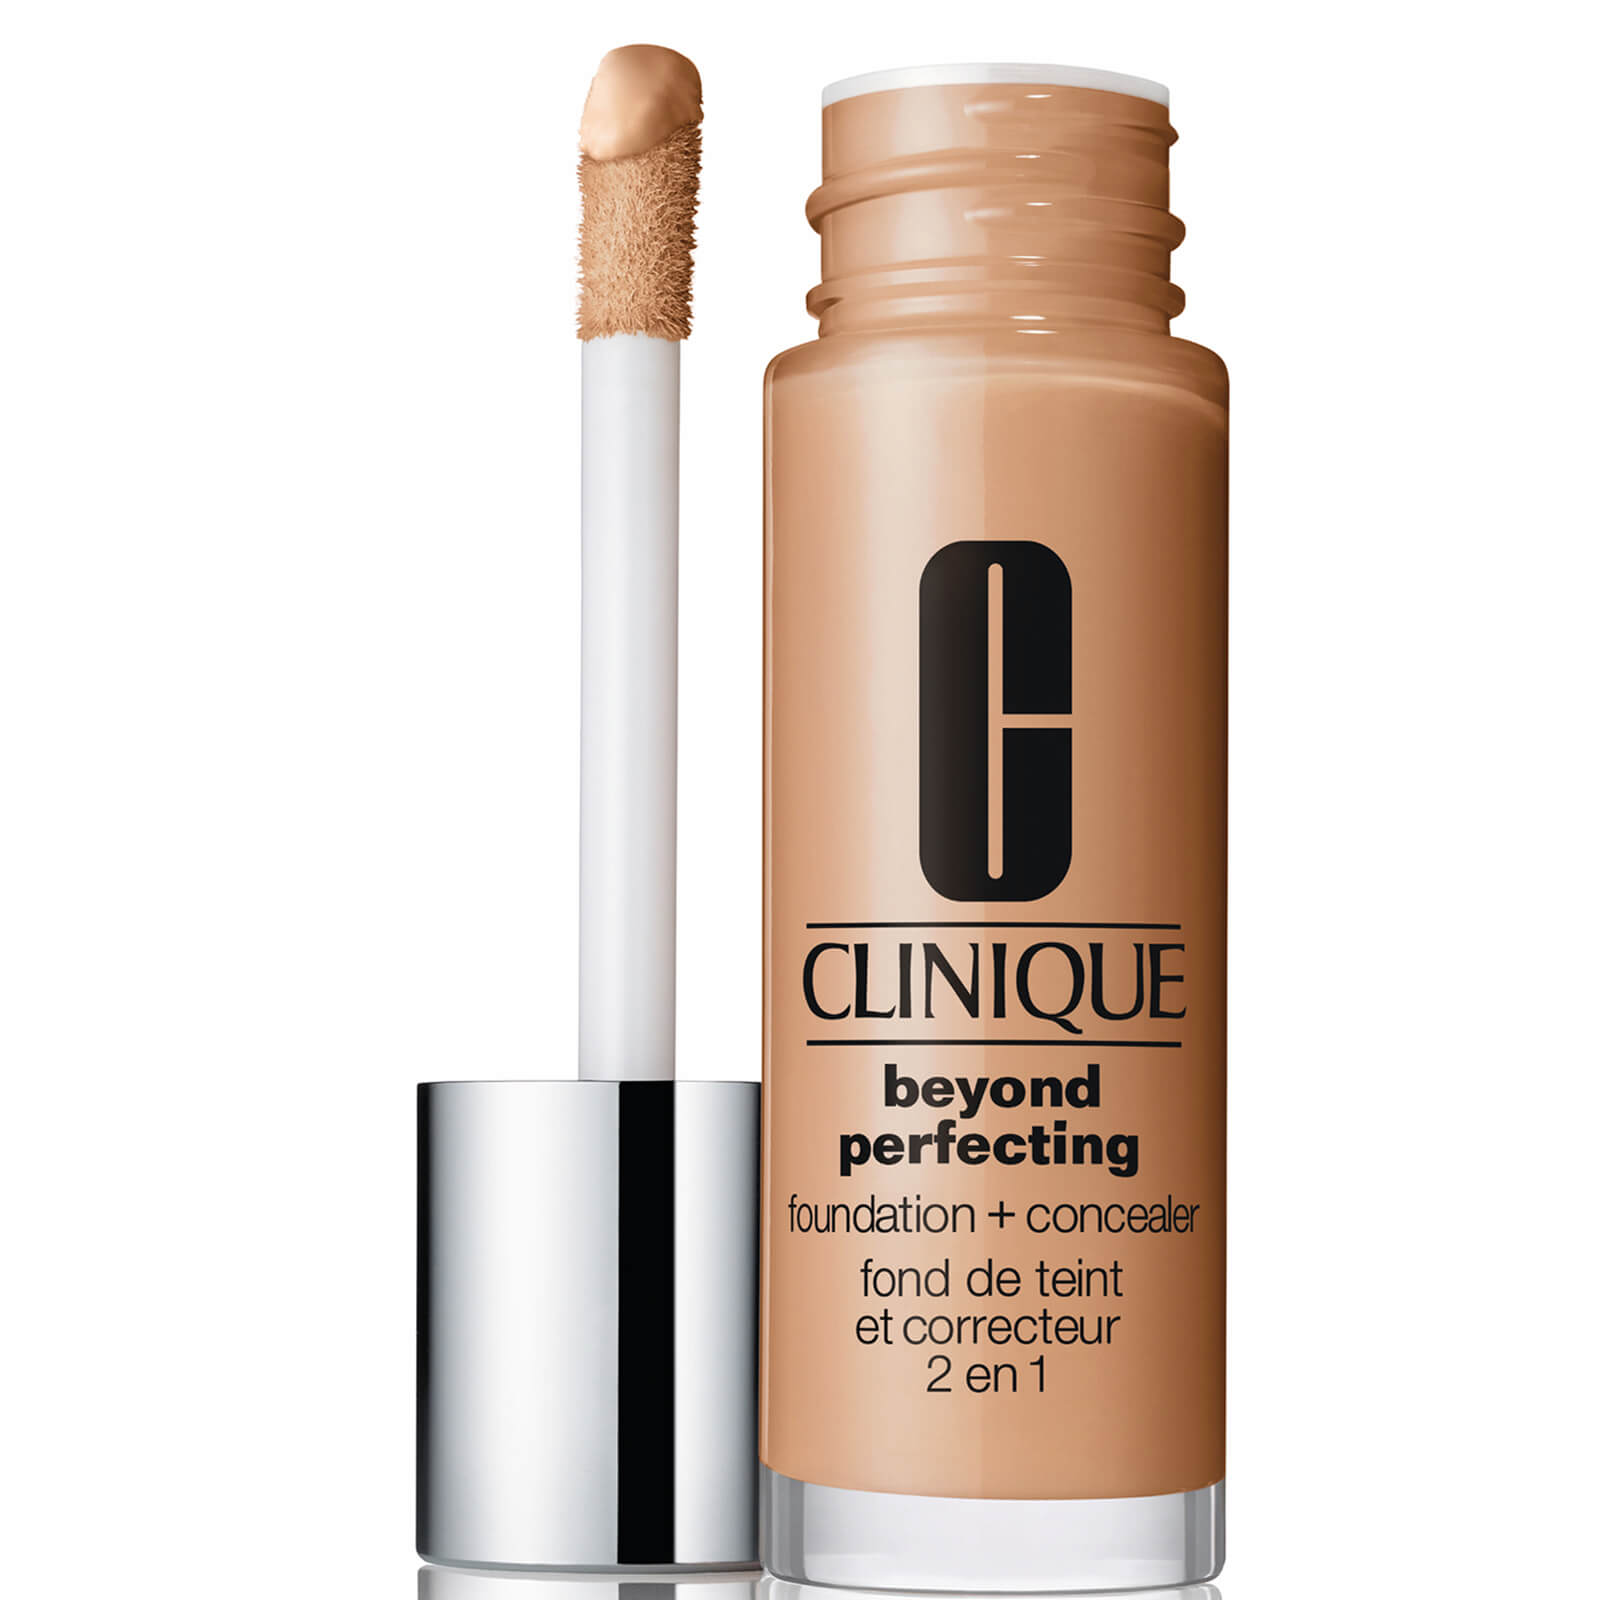 Clinique Beyond Perfecting Foundation and Concealer 30ml (Various Shades) - Beige